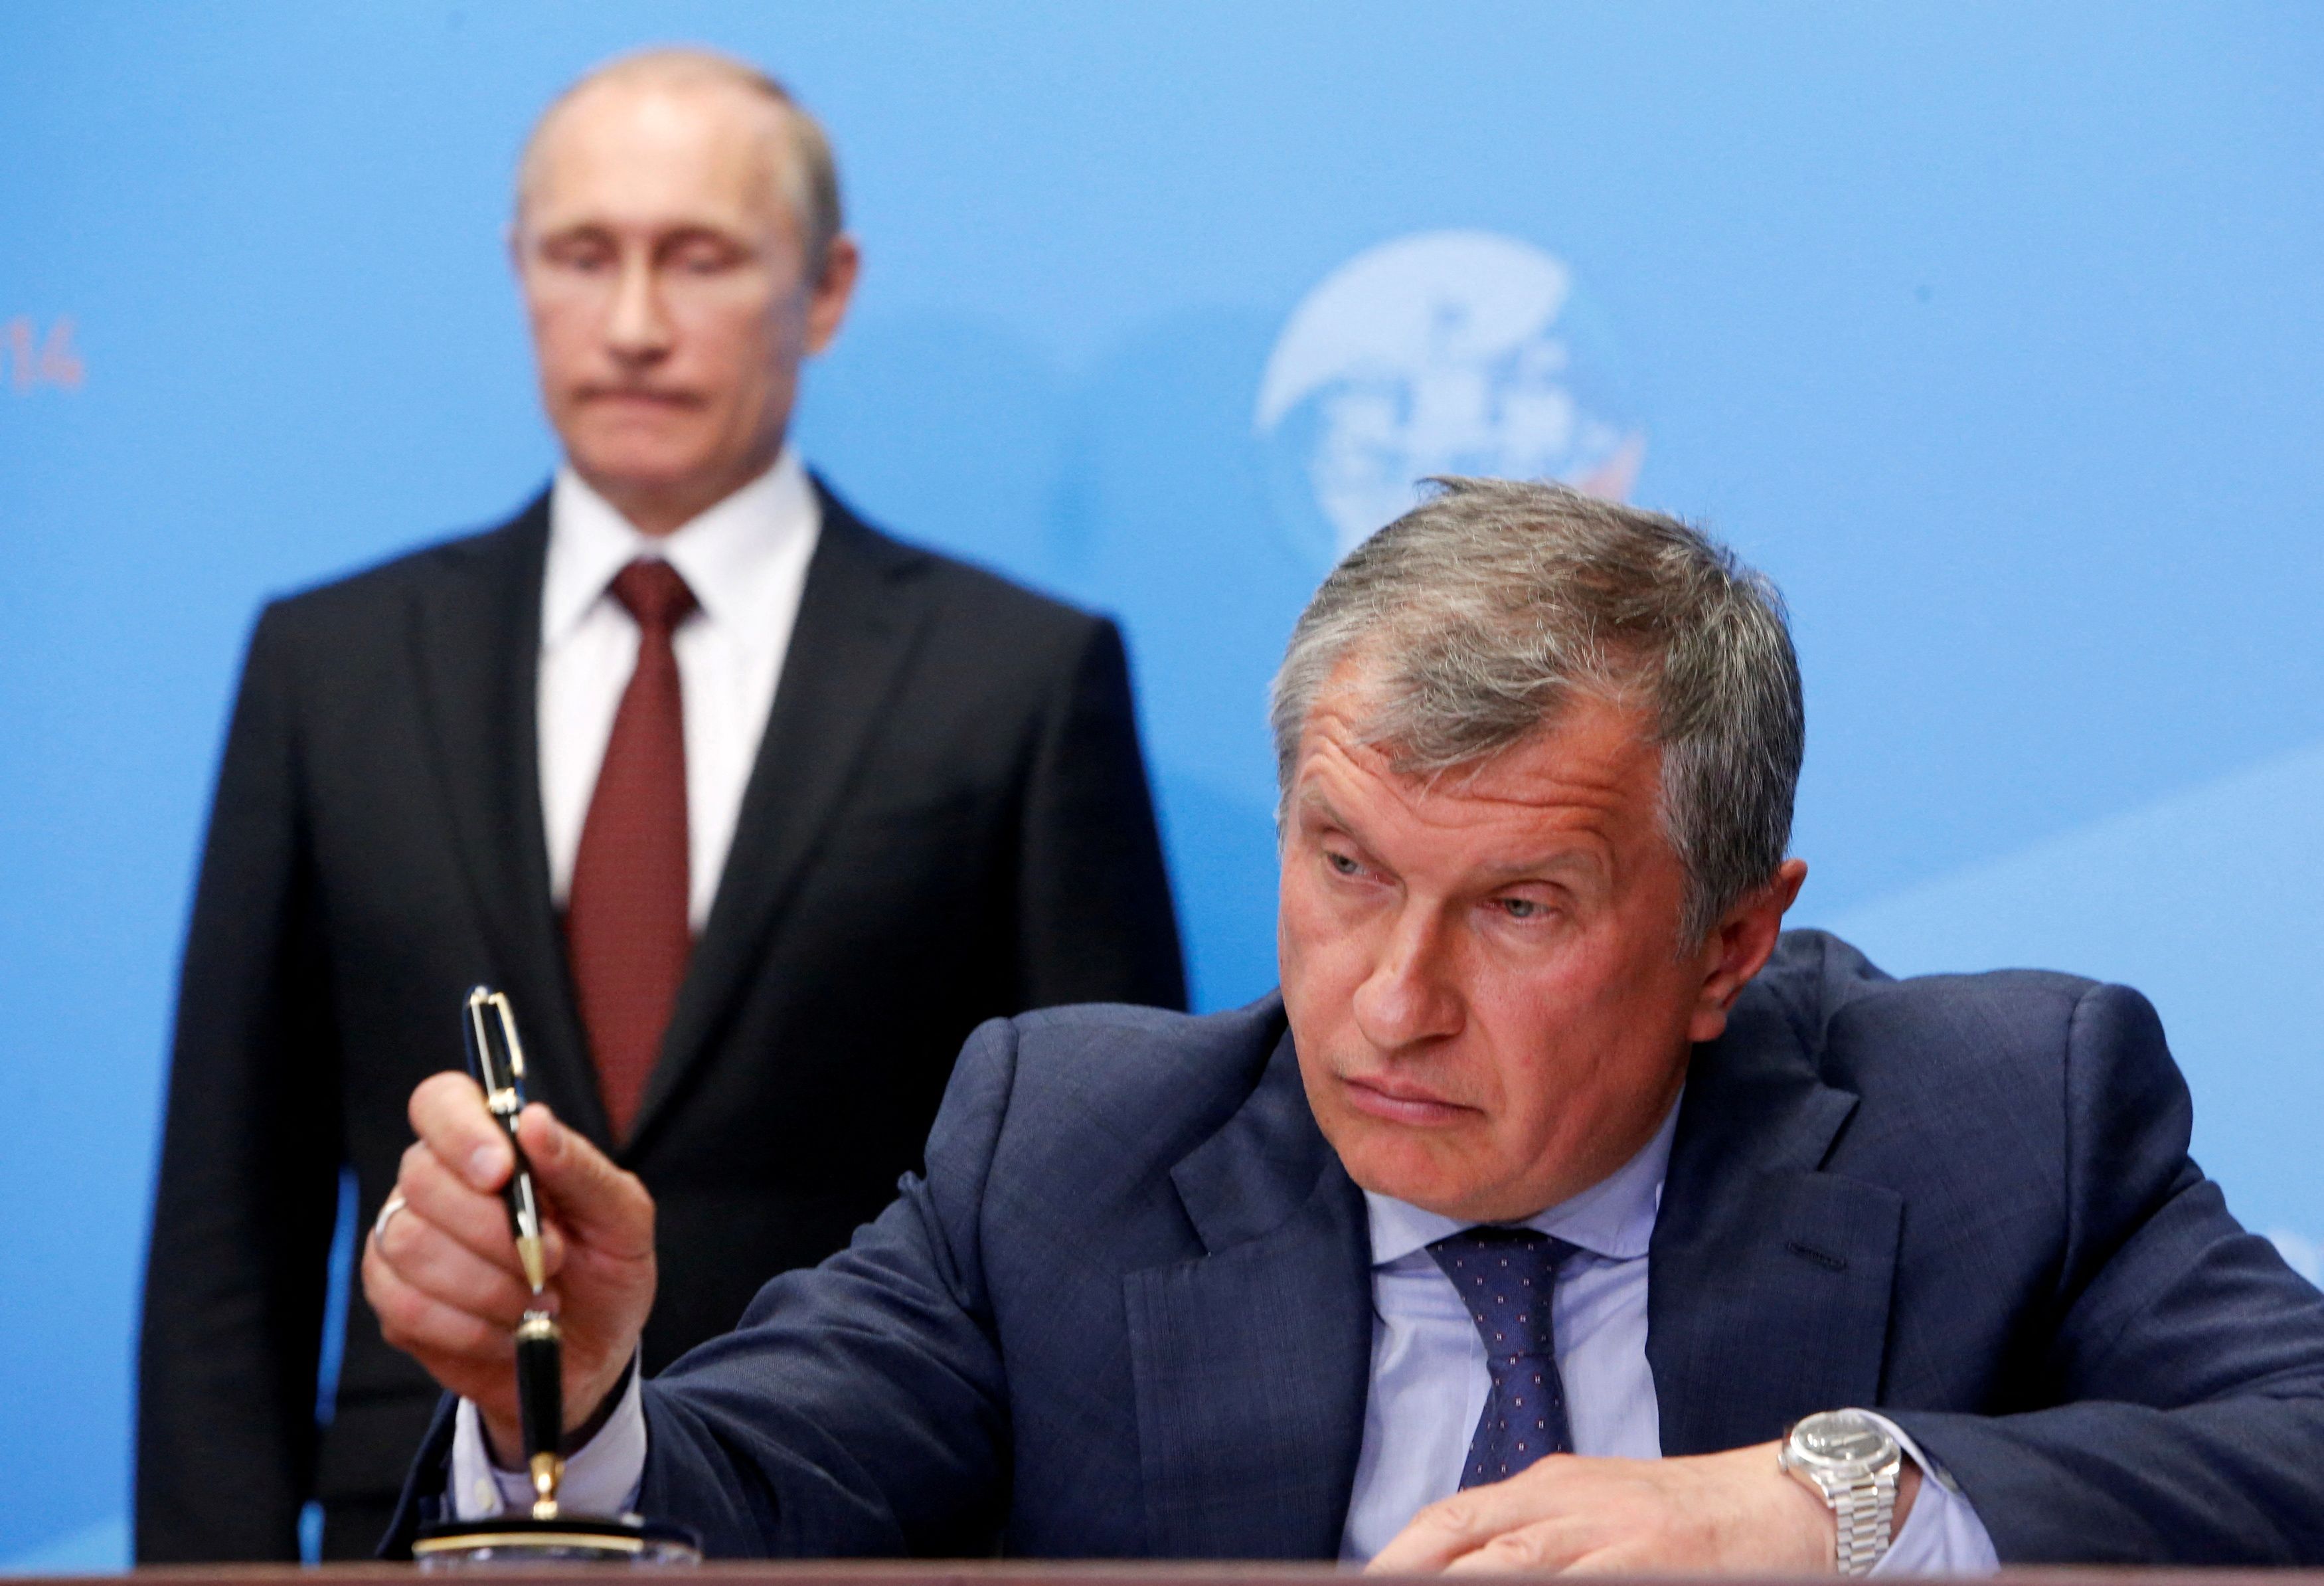 Russia's President Putin and Rosneft CEO Igor Sechin attend a signing ceremony at the St. Petersburg International Economic Forum 2014 in St. Petersburg